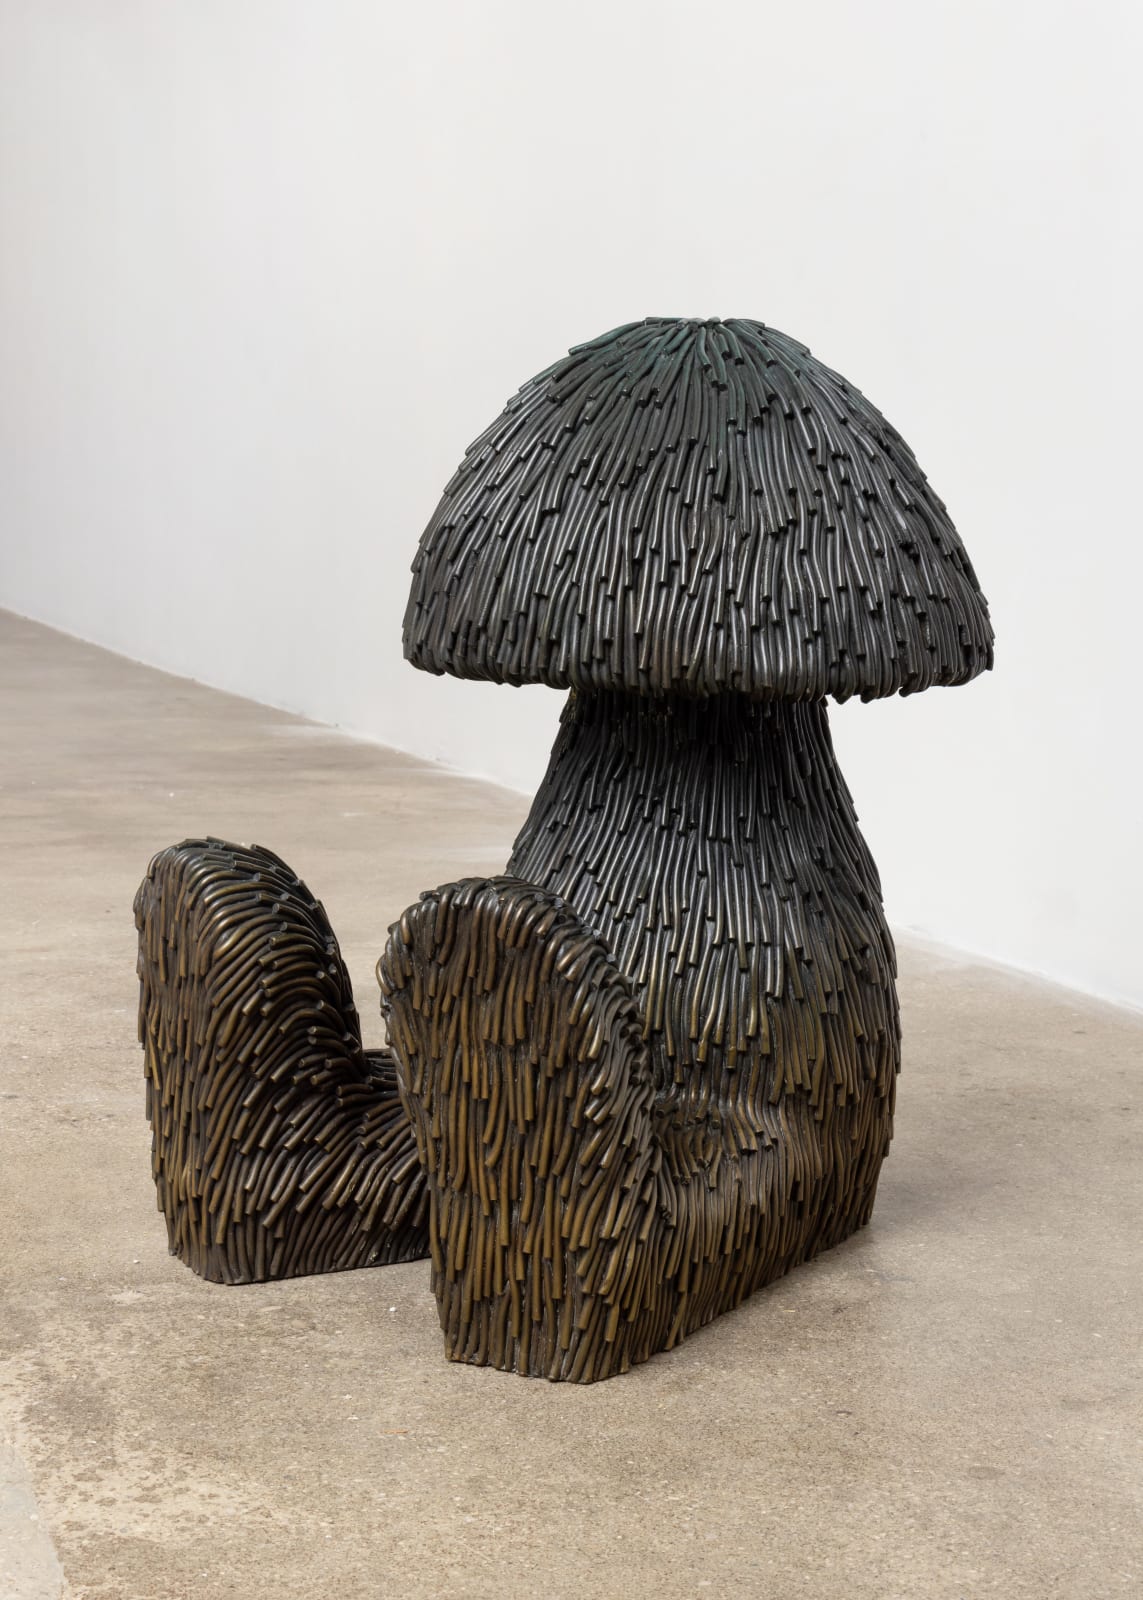 Free-standing bronze sculpture of a body with a mushroom-shaped head. The sculpture is cast with a surface texture resembling shaggy hair and treated with a greenish black patina that turns into bronze, from top to bottom. 